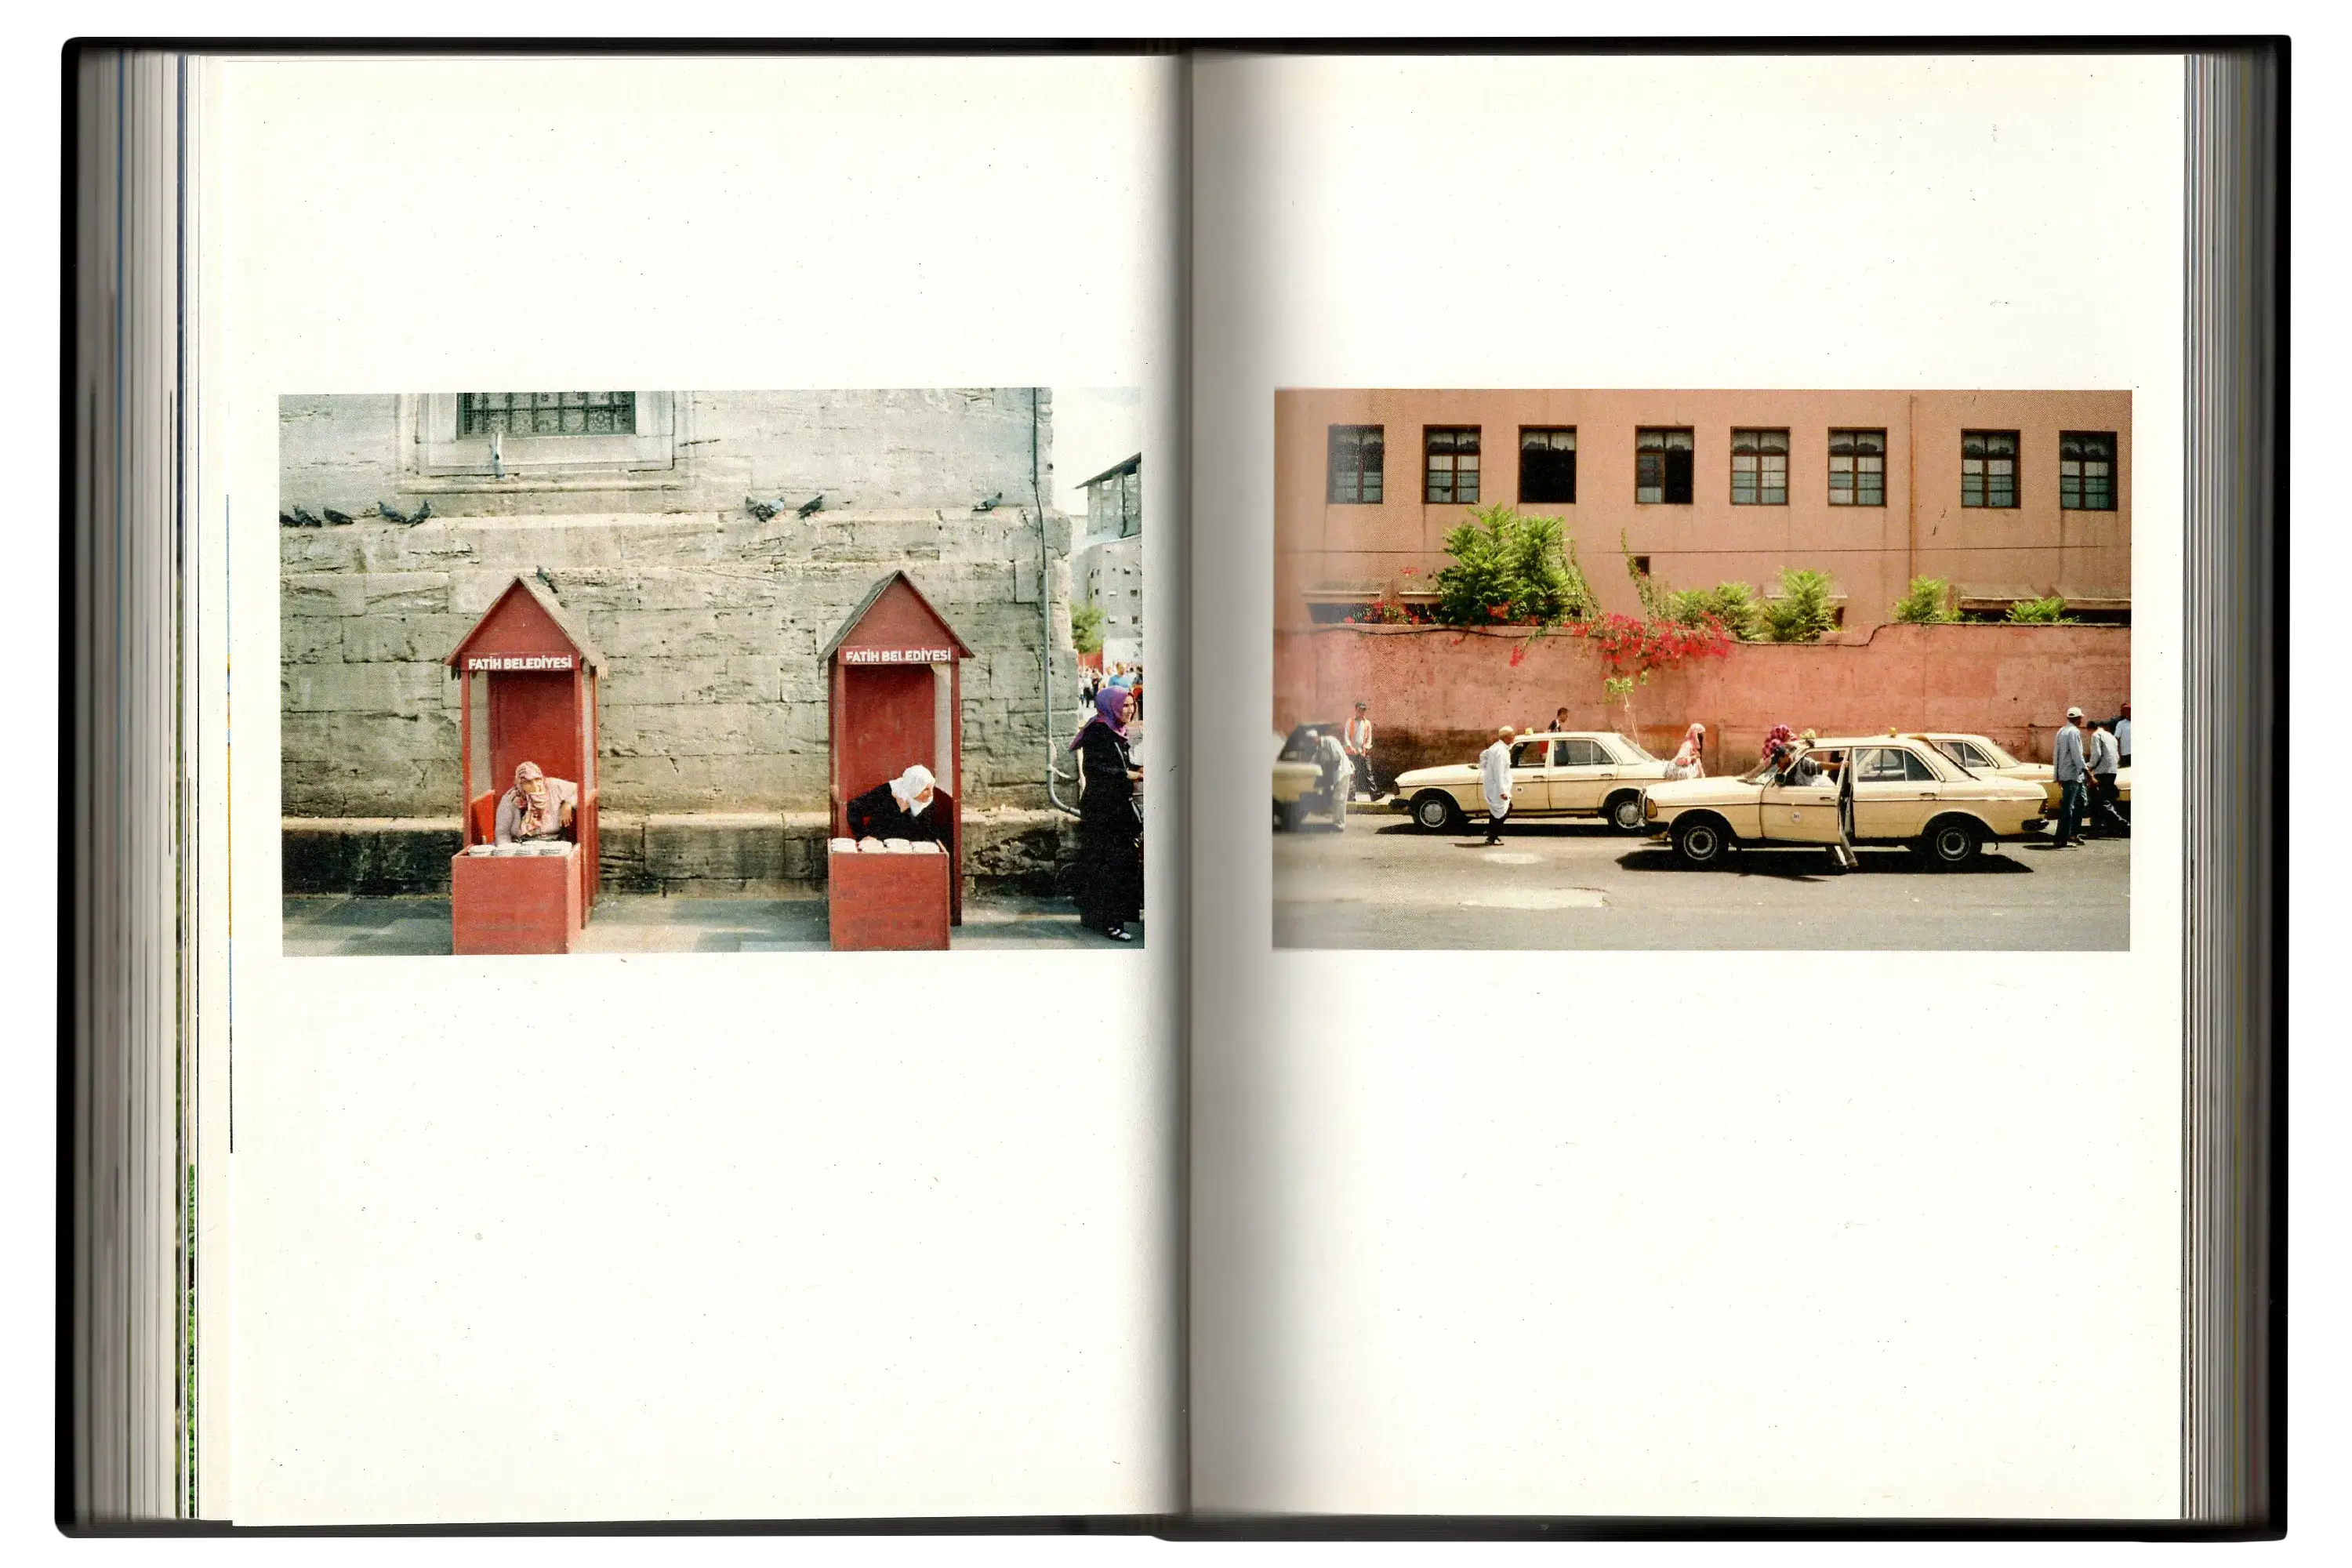 Imperfect Photo Book - left page image of two women in stands wearing hijabs, right page image shows men surrounding taxis 